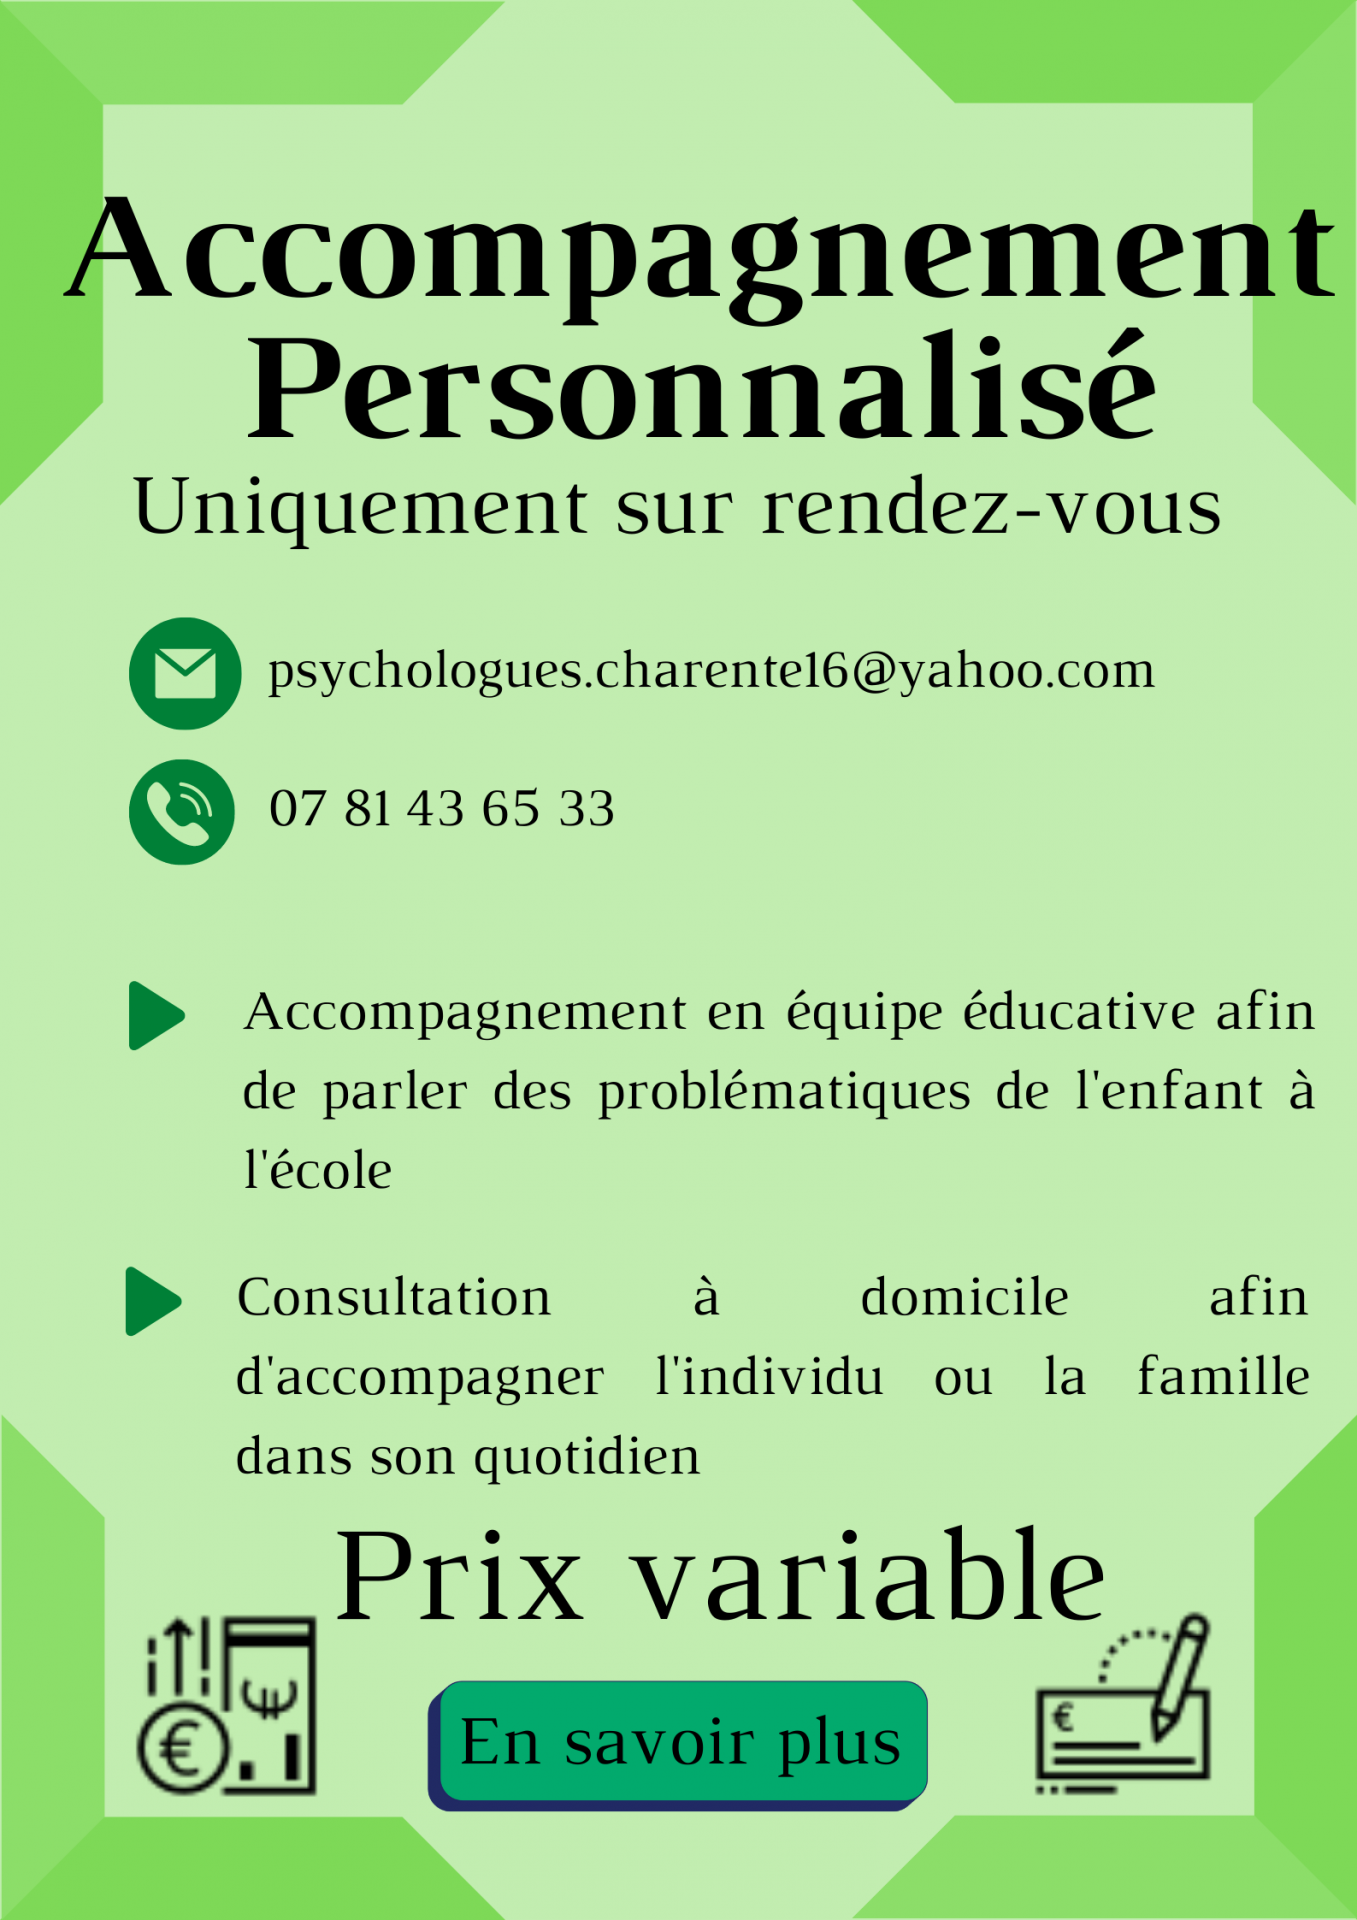 Accompagnement personnalise 1